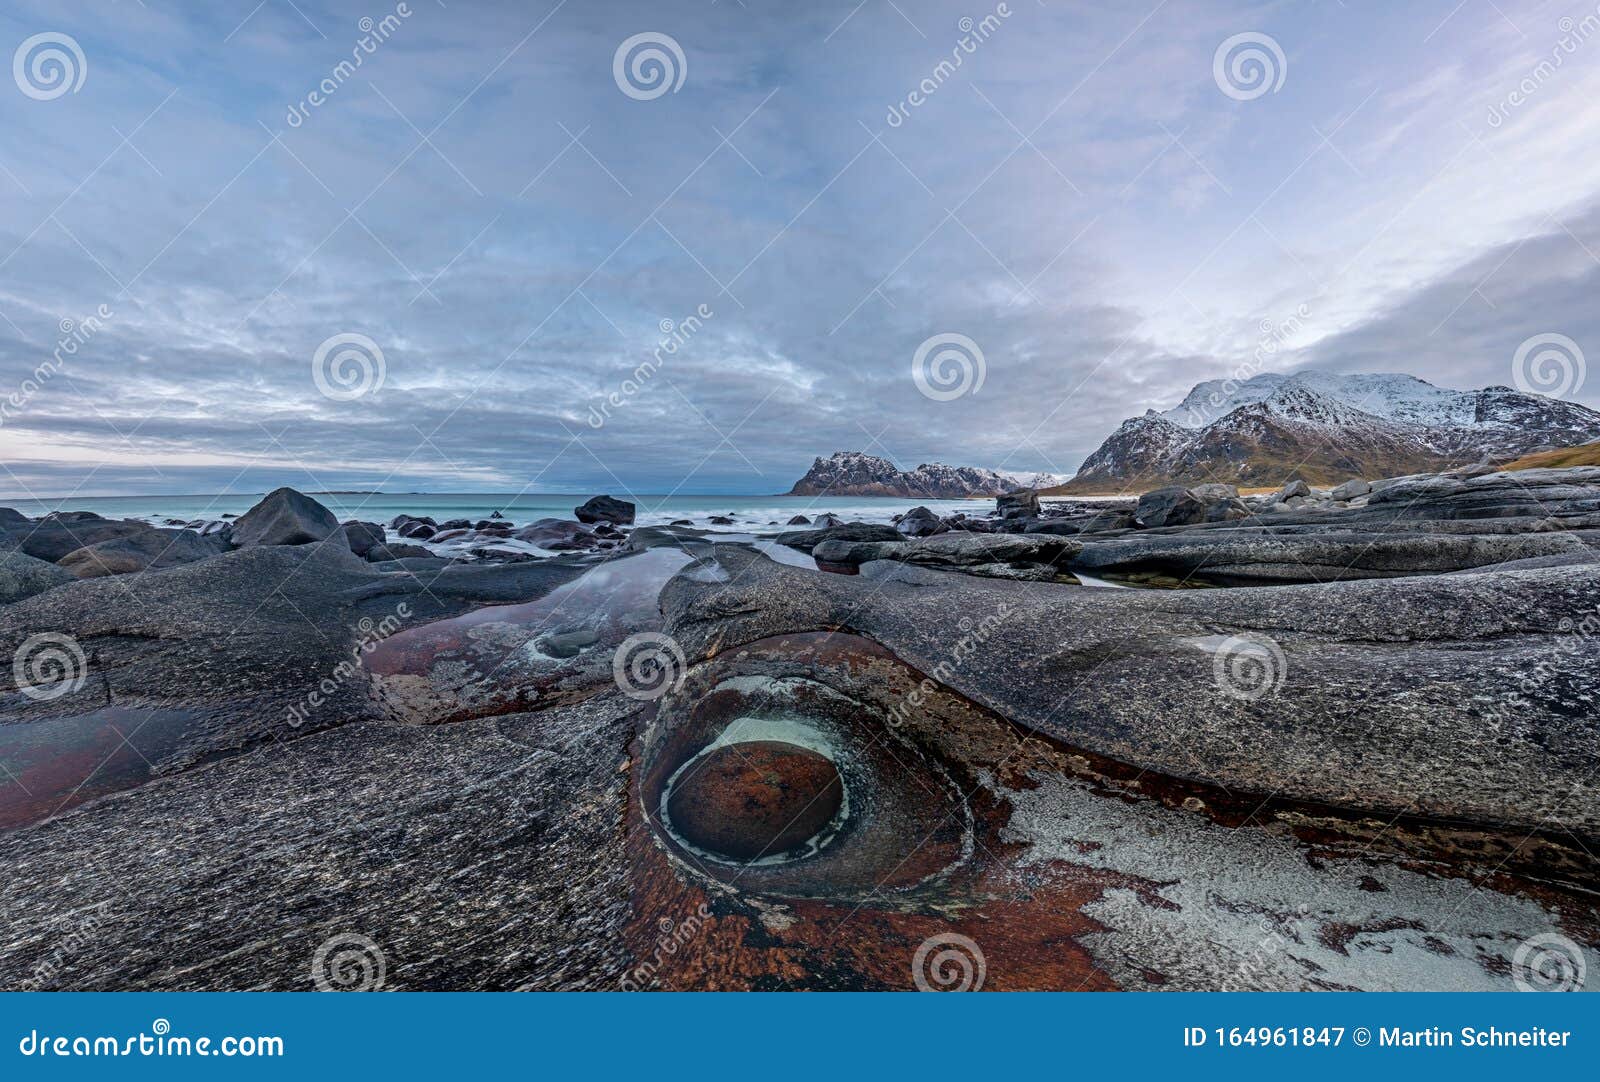 The Dragons Eye Is A Unique Natural Rock Formation At Uttakleiv Beach ...